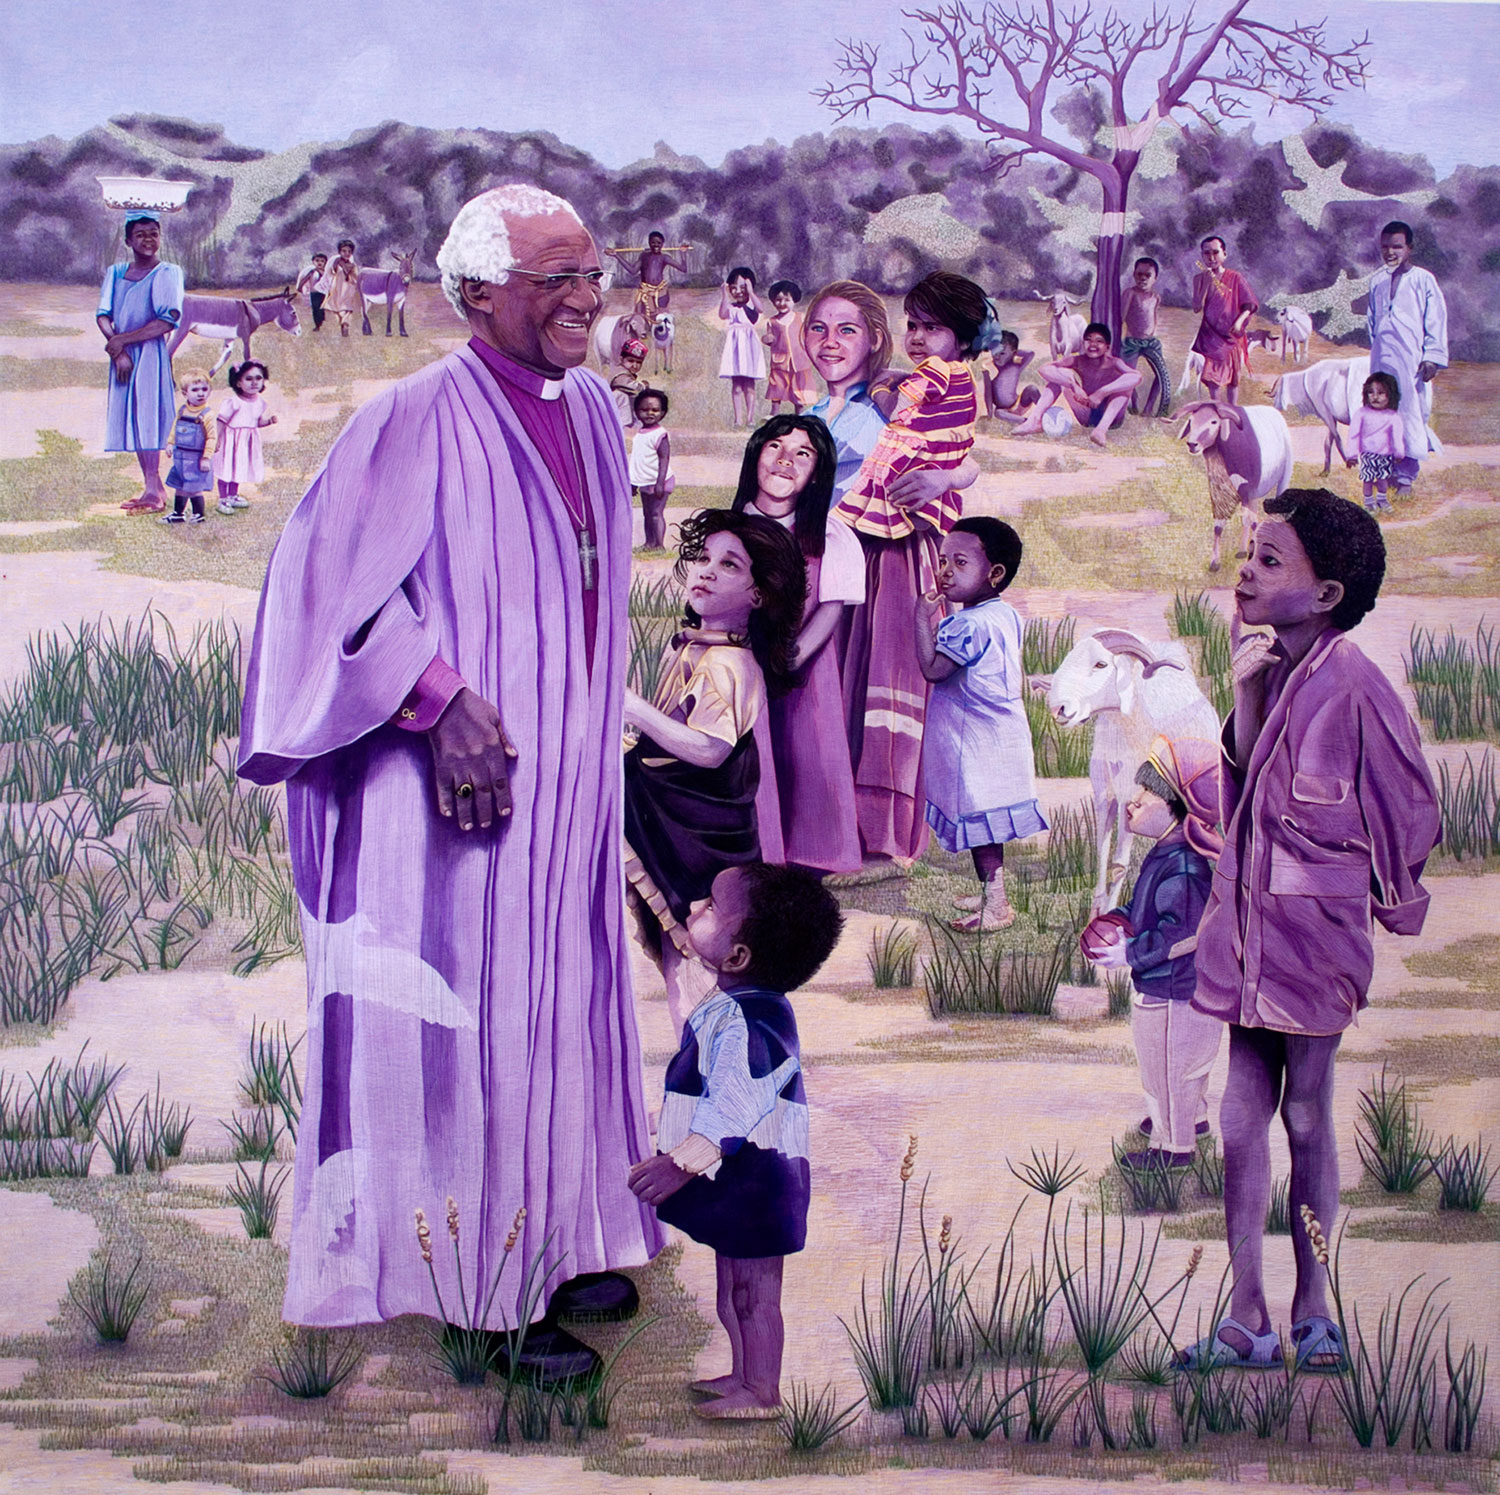 A group of people surrounding a man in long purple robe